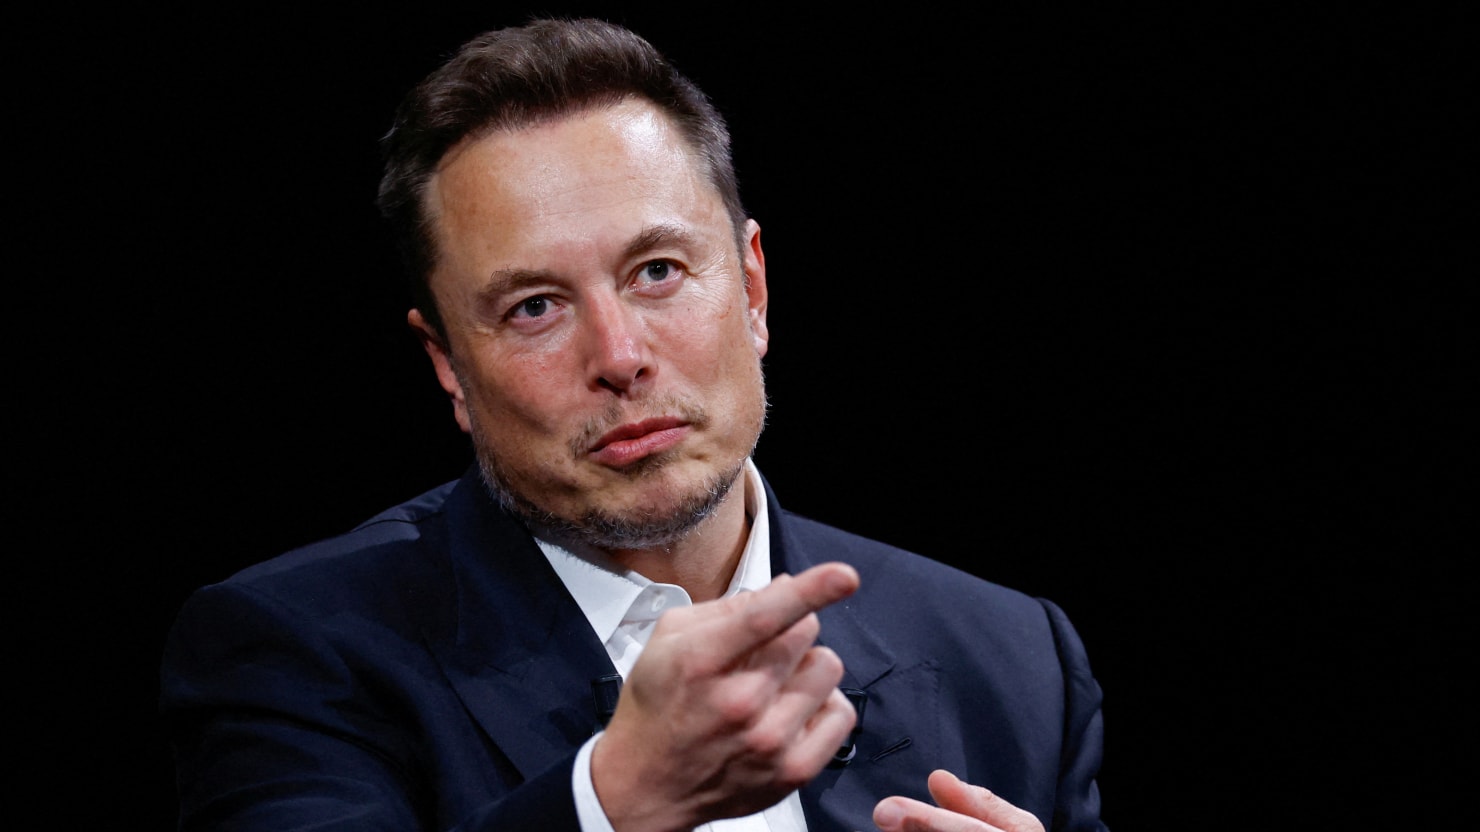 X Usage Declines in First Year Under Elon Musk – The Daily Beast